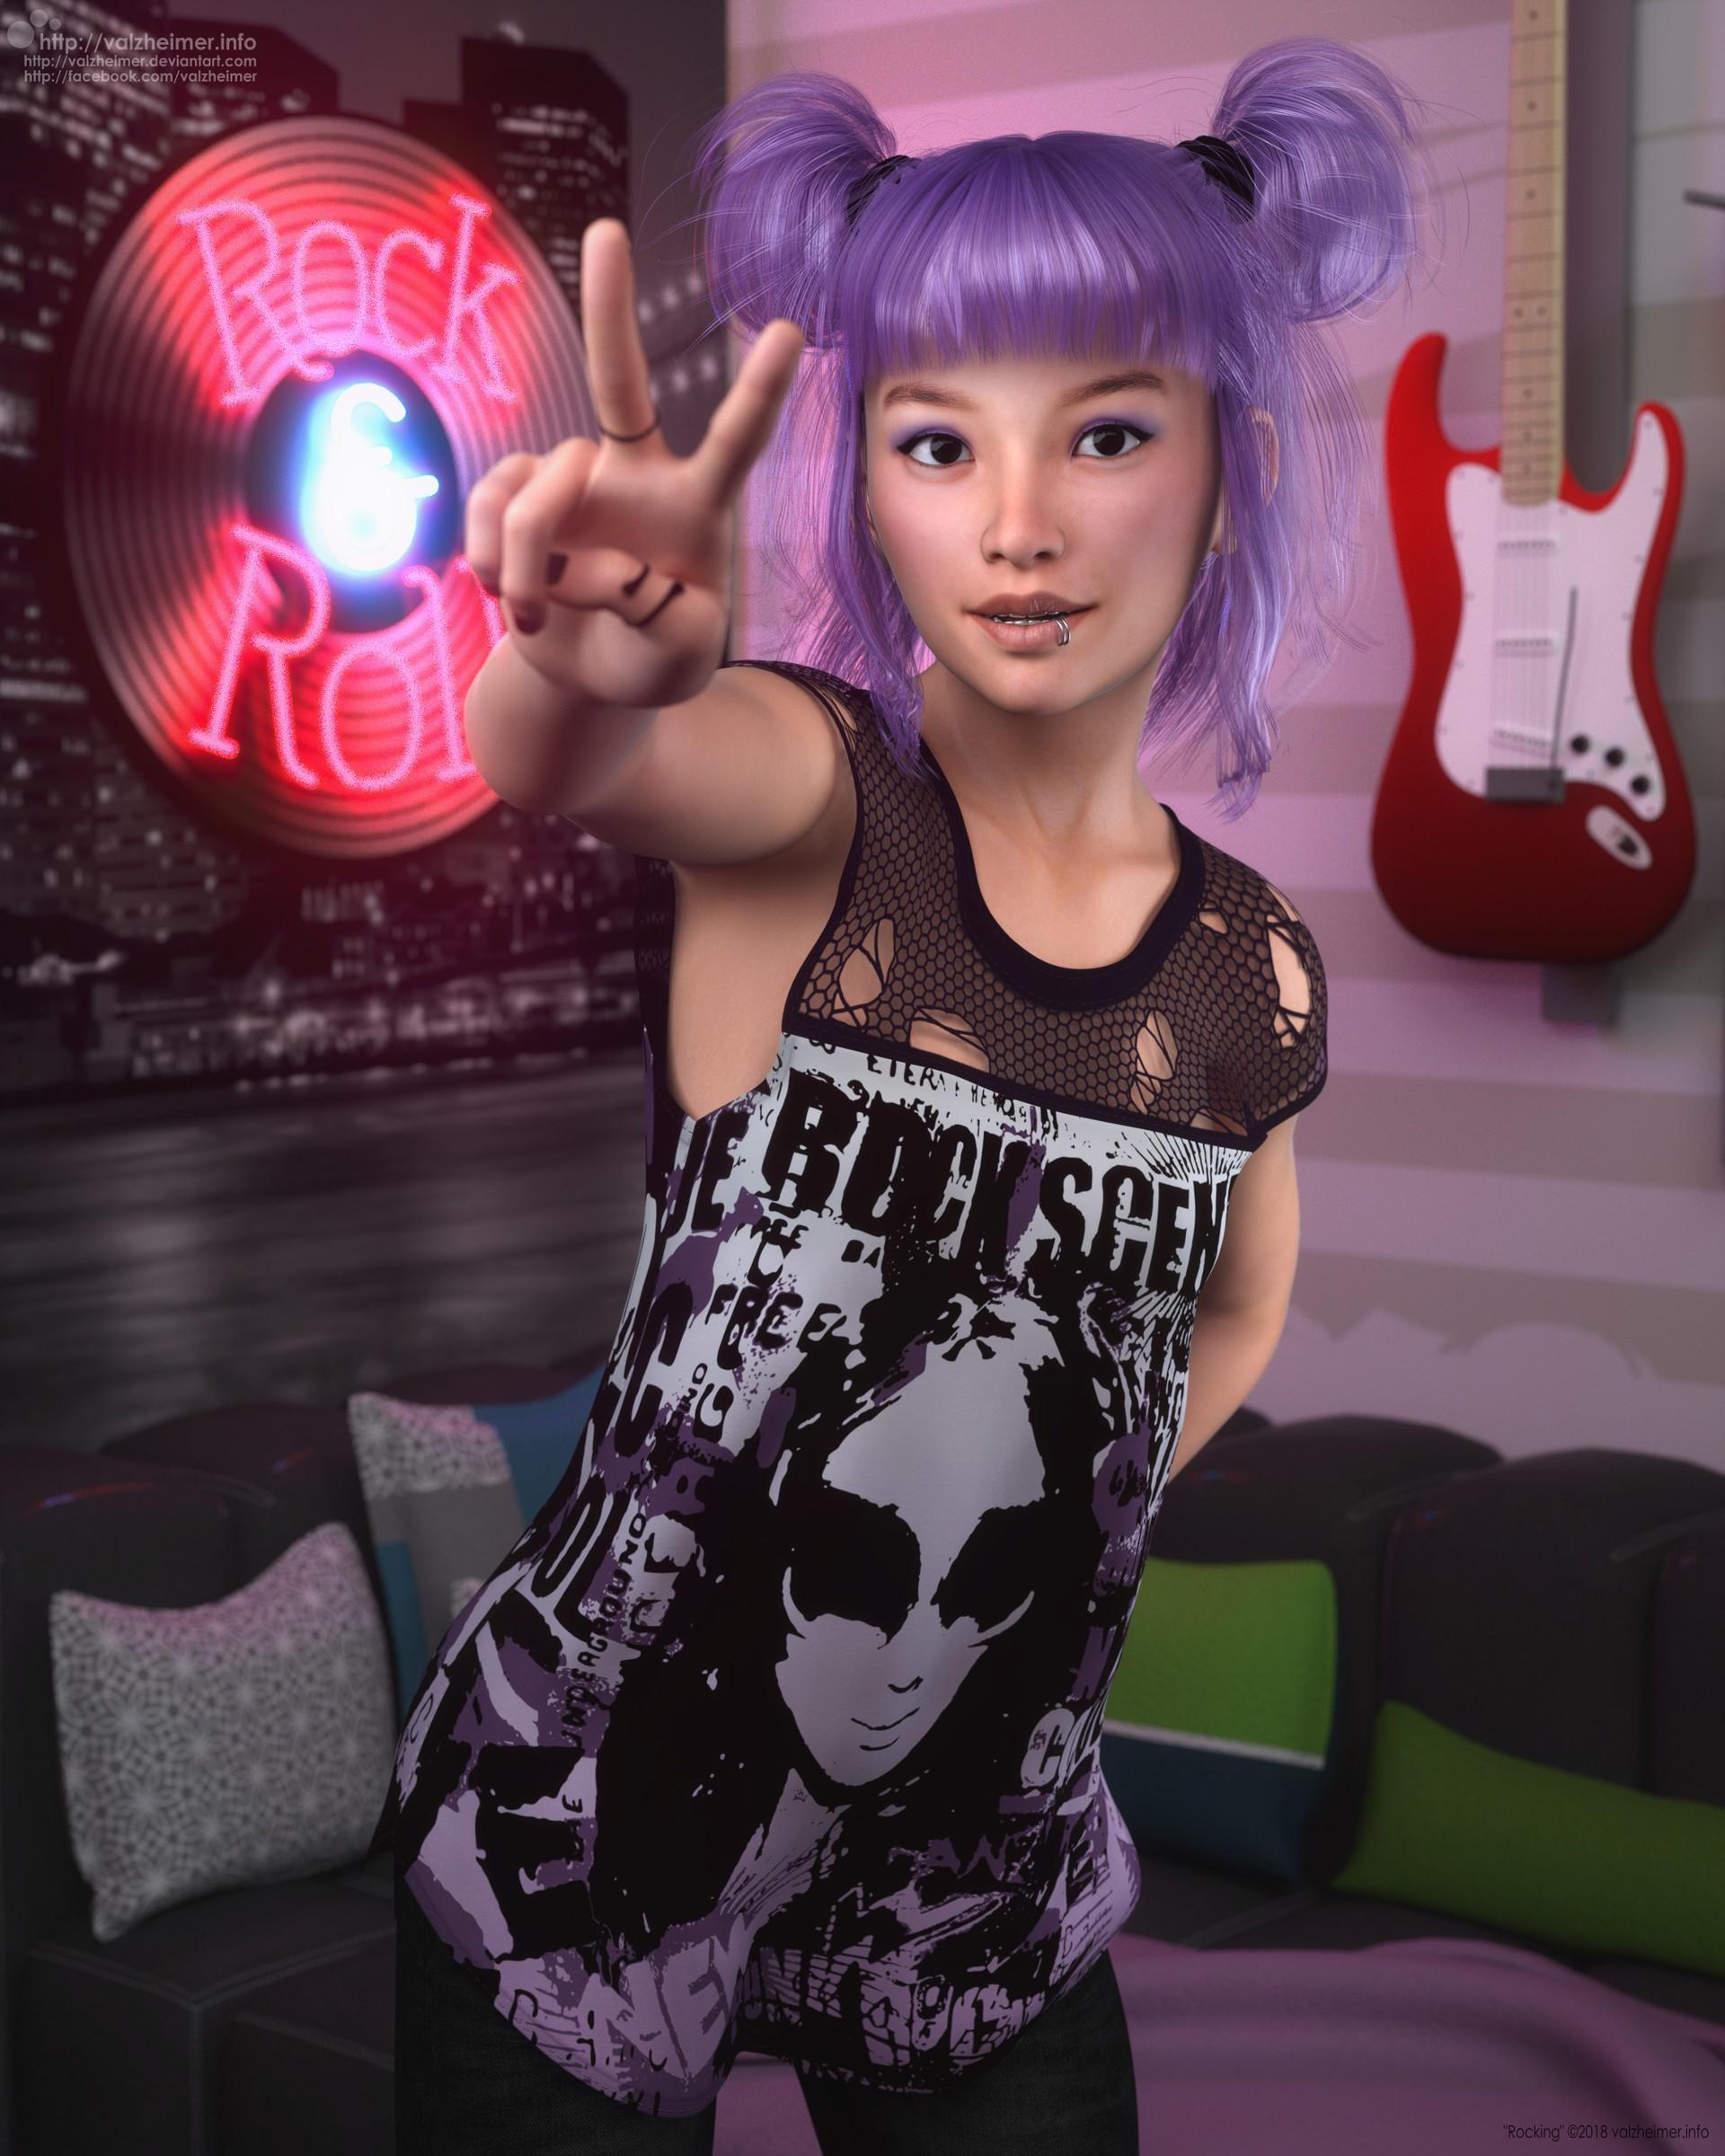 HD wallpaper, Cushions, Couch, Verica Hupe, Women Indoors, Standing, Portrait Display, Rock And Roll, Pigtails, Indoors, Peace Sign, Electric Guitar, Purple Hair, Artstation, 3D, Guitar, Looking At Viewer, Open Mouth, Digital Painting, Digital Art, Pierced Lip, Women, Cgi